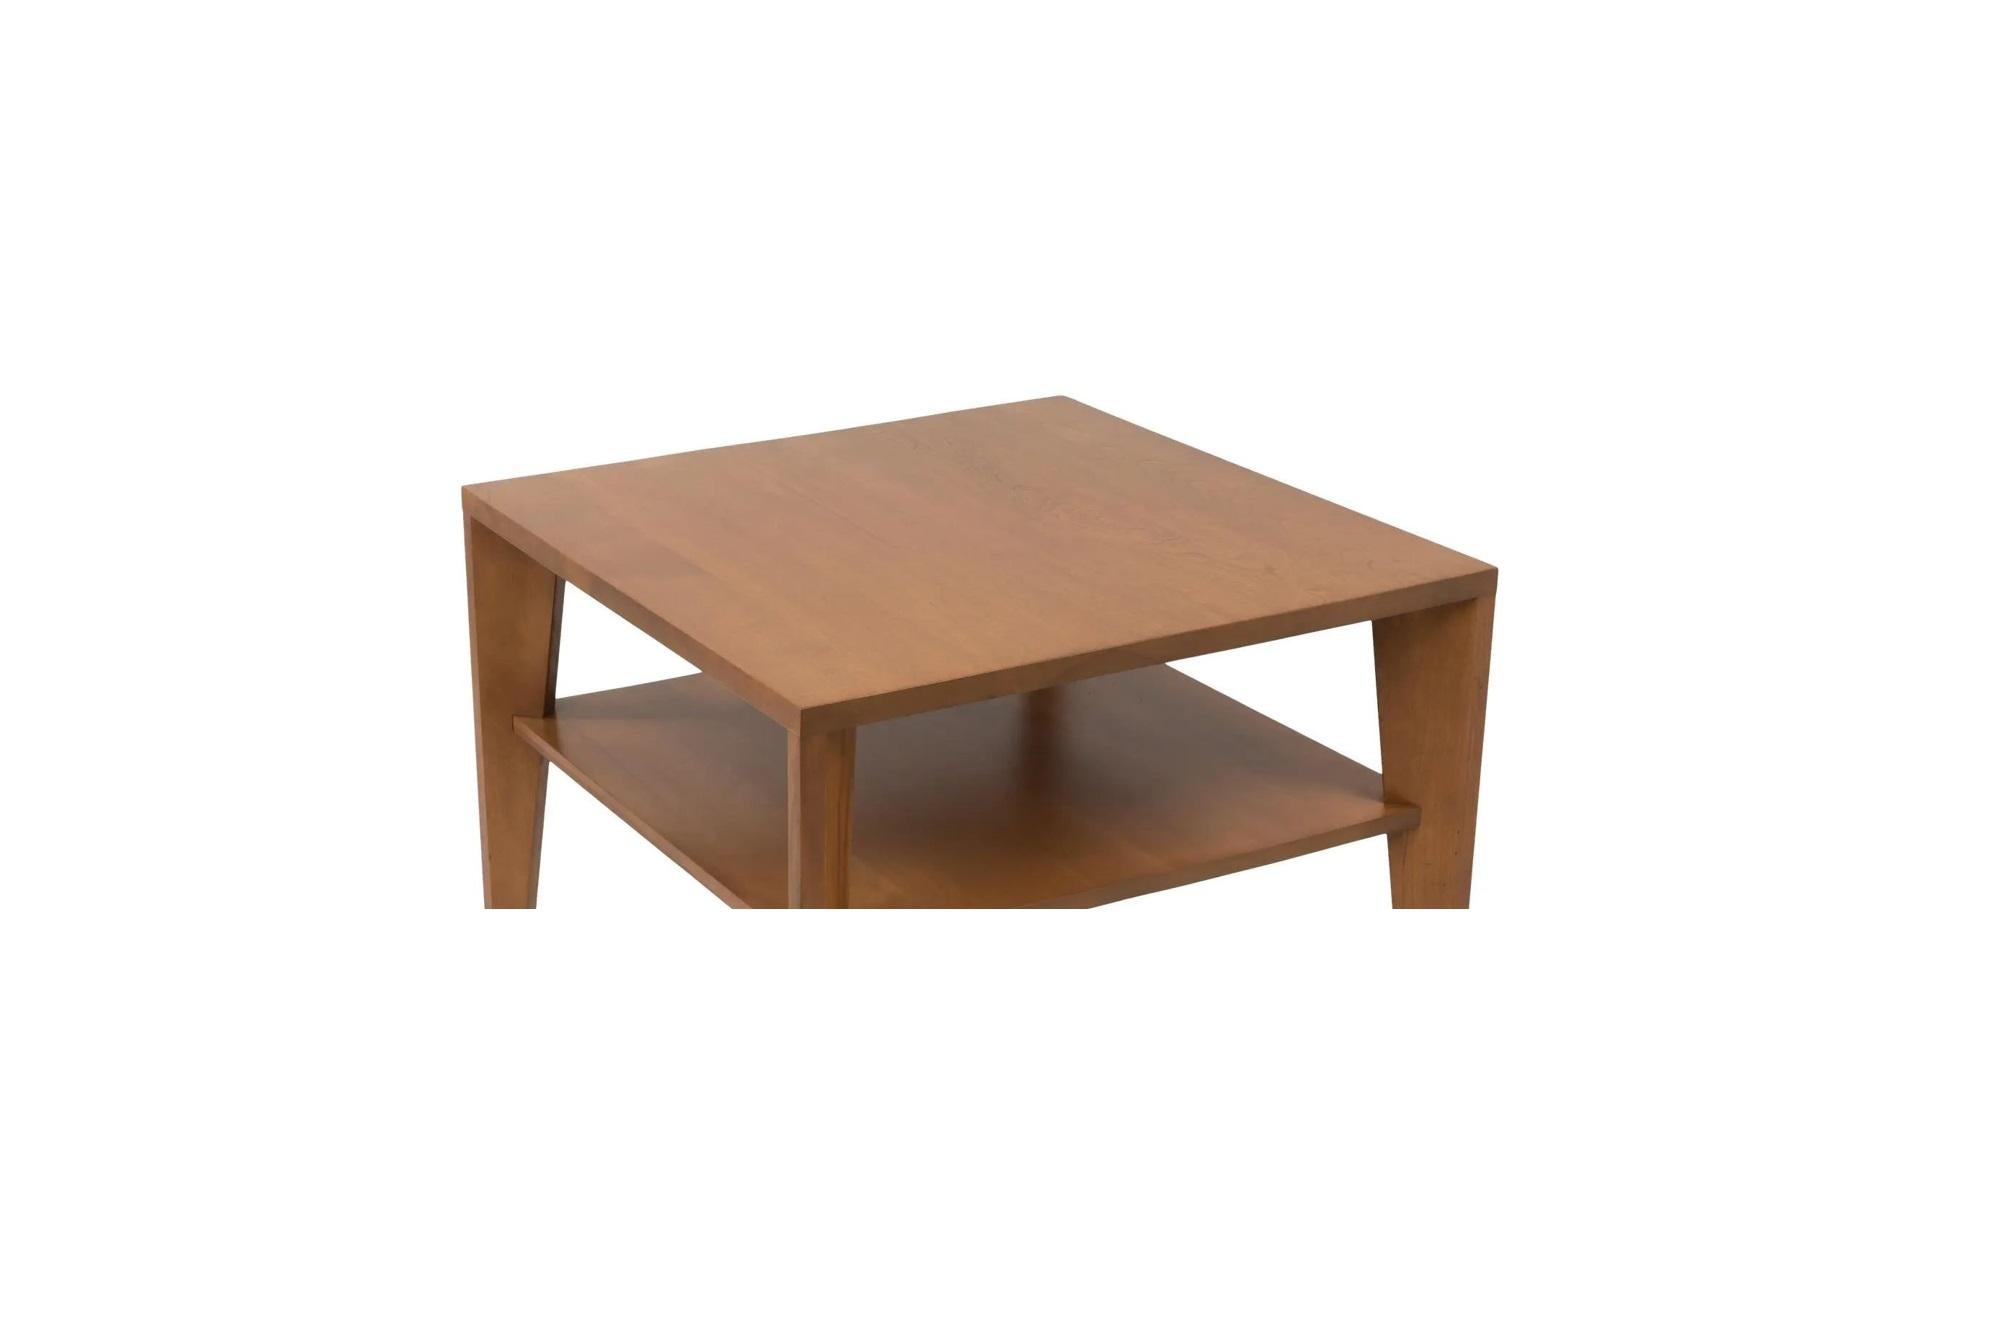 Mid-20th Century Modernist Russel Wright Square Tables by Conant Ball For Sale